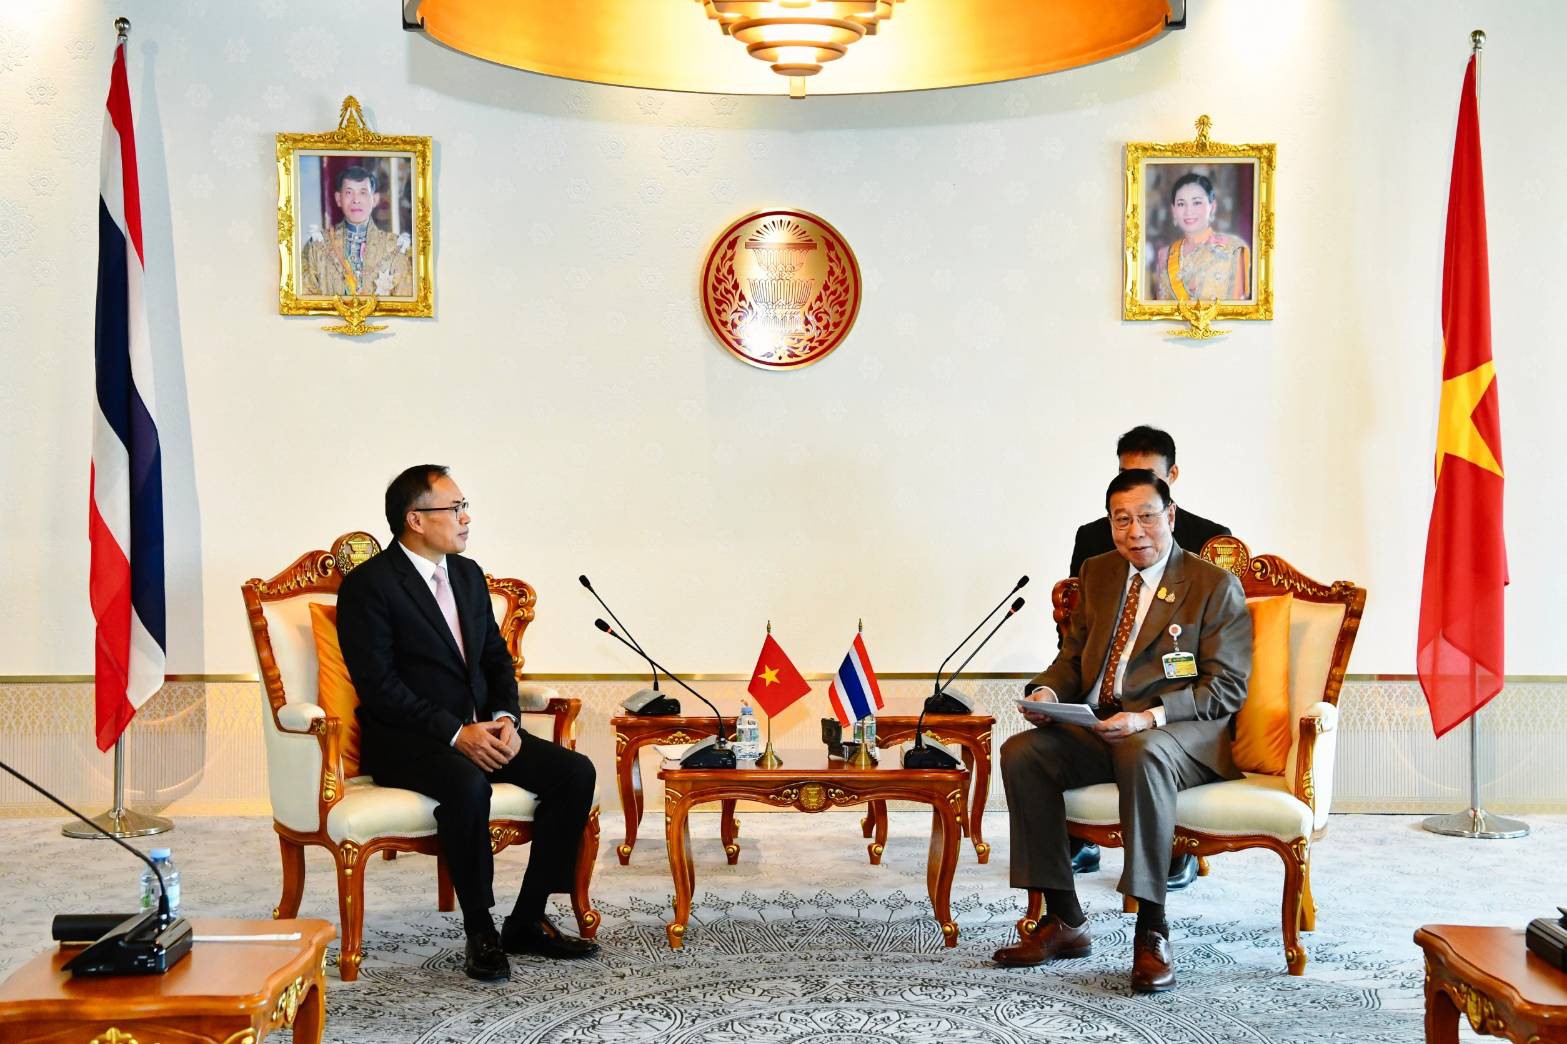 President of the Senate Welcomed H.E. Mr. Phan Chi Thanh Ambassador of the Socialist Republic of Vietnam to Thailand On the Occasion of Assuming Position 